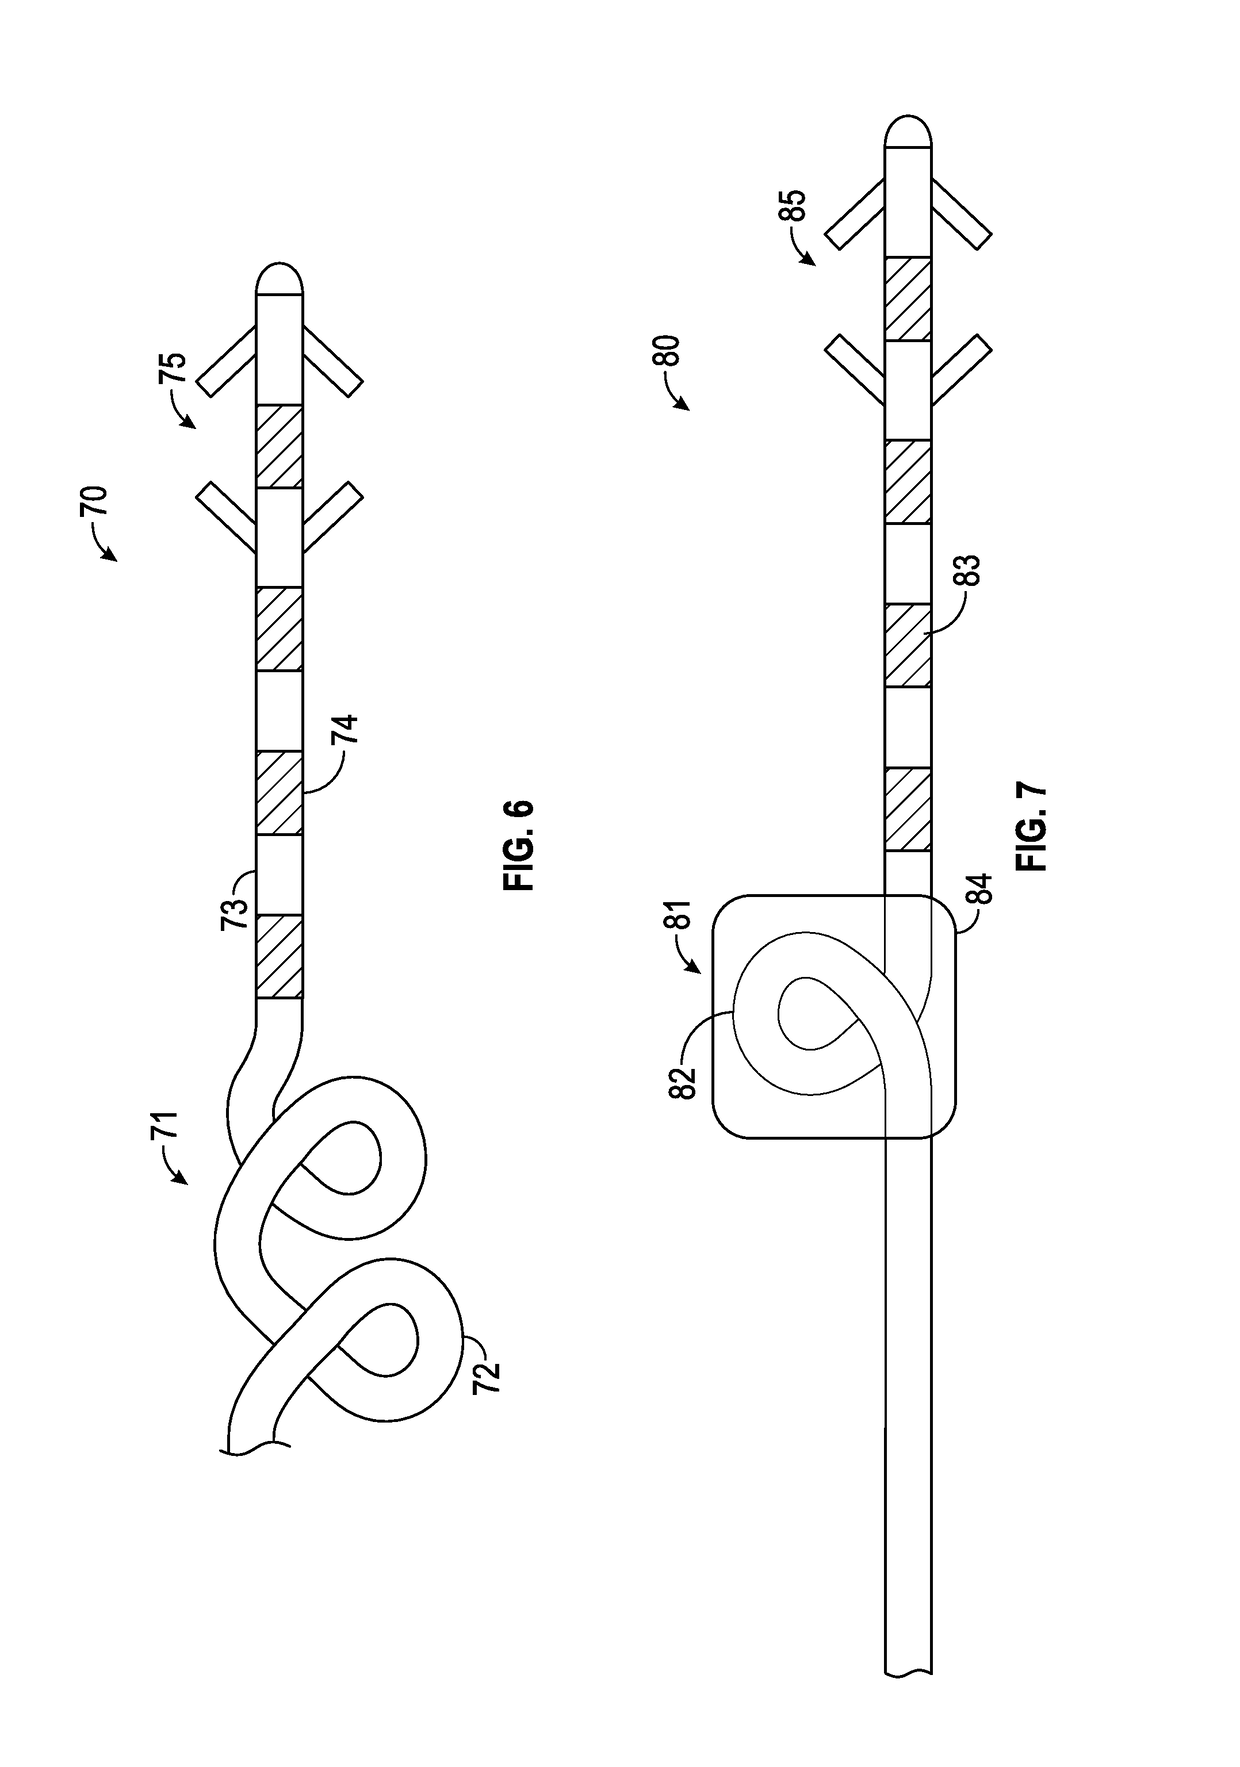 Electrode leads for use with implantable neuromuscular electrical stimulator